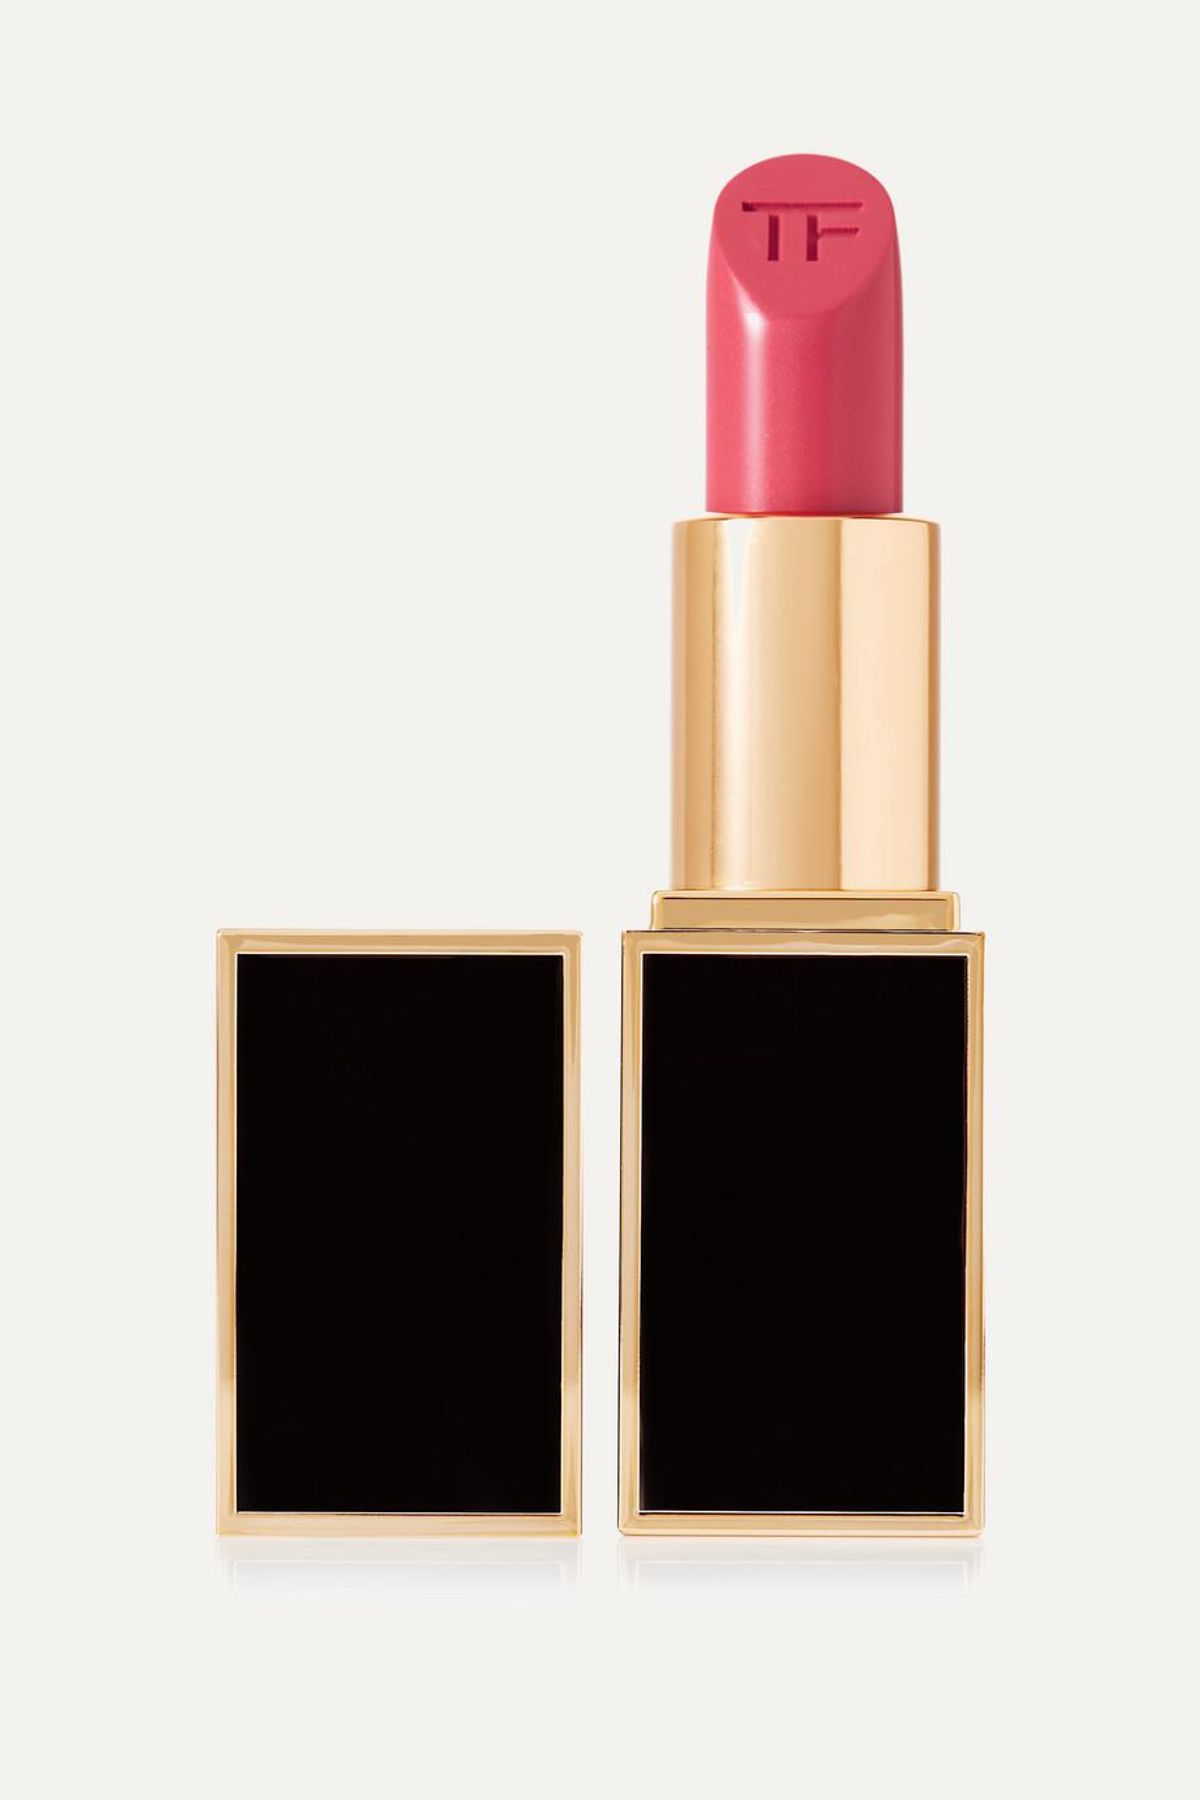 tom ford beauty lip color in flamingo